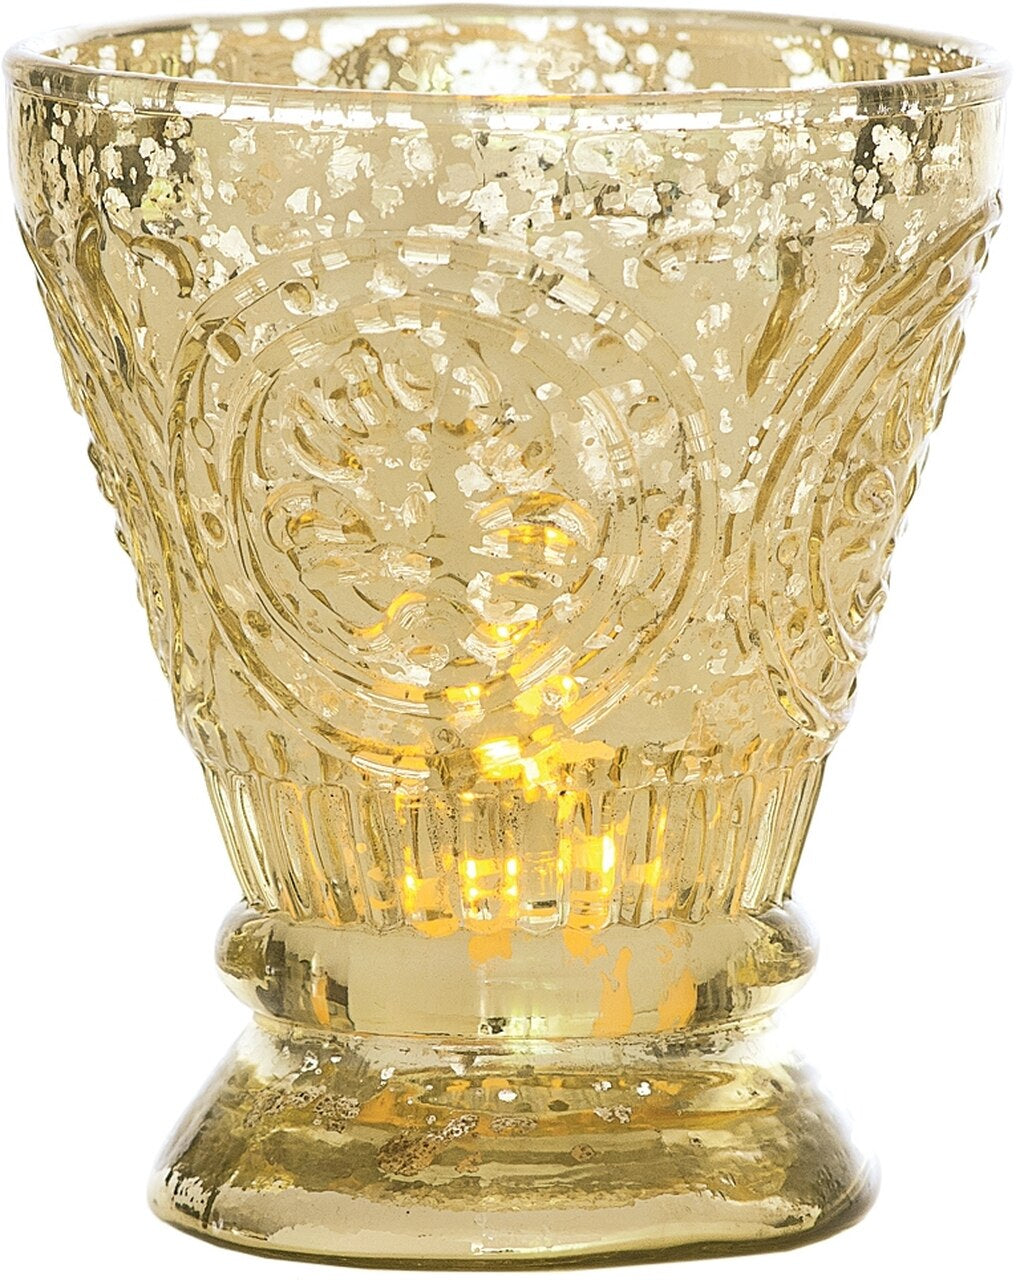 2-PACK | Vintage Mercury Glass Candle Holder (4-Inch, Rosemary Design, Gold) - For Use with Tea Lights - For Home Decor, Parties, and Wedding Decorations